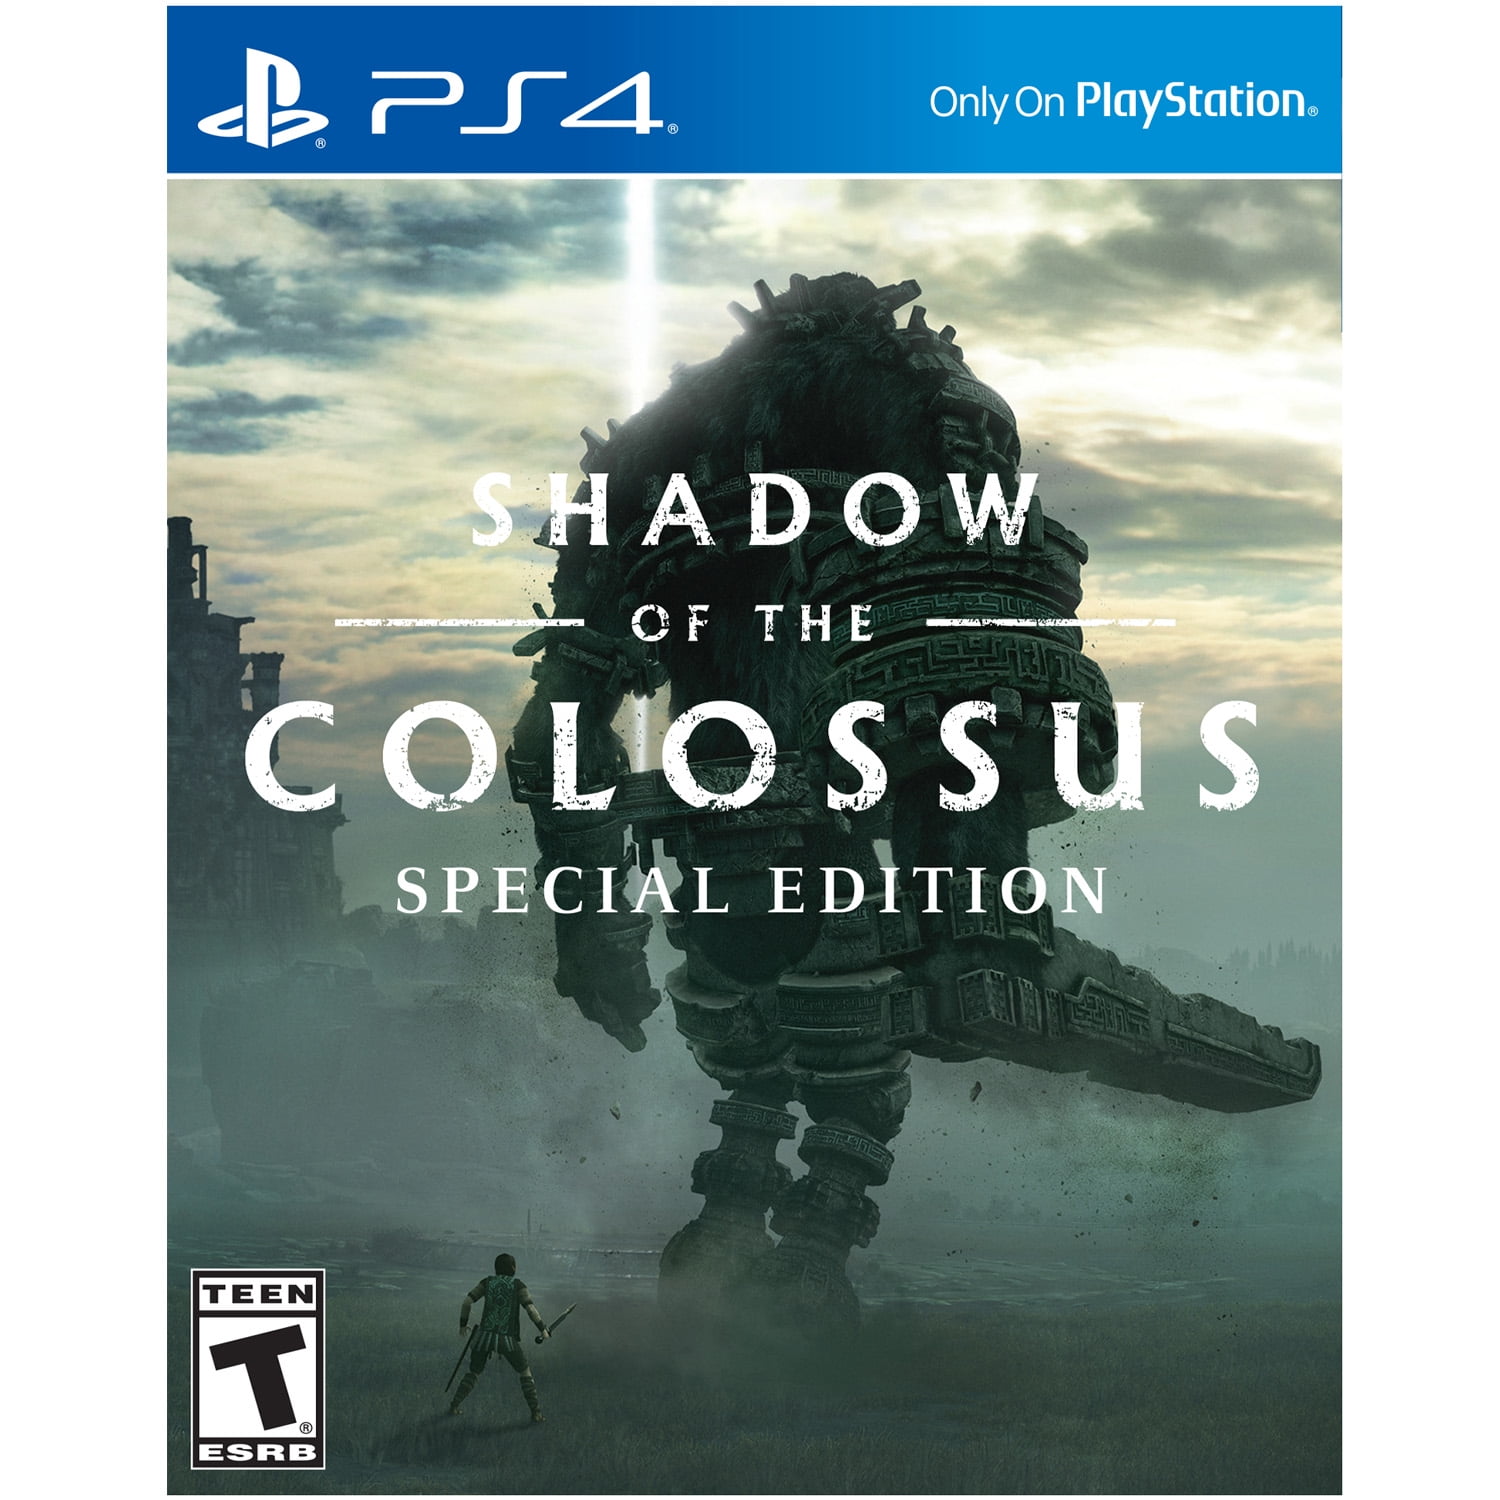 Shadow of the Colossus, Sony, PlayStation 4, 711719510512